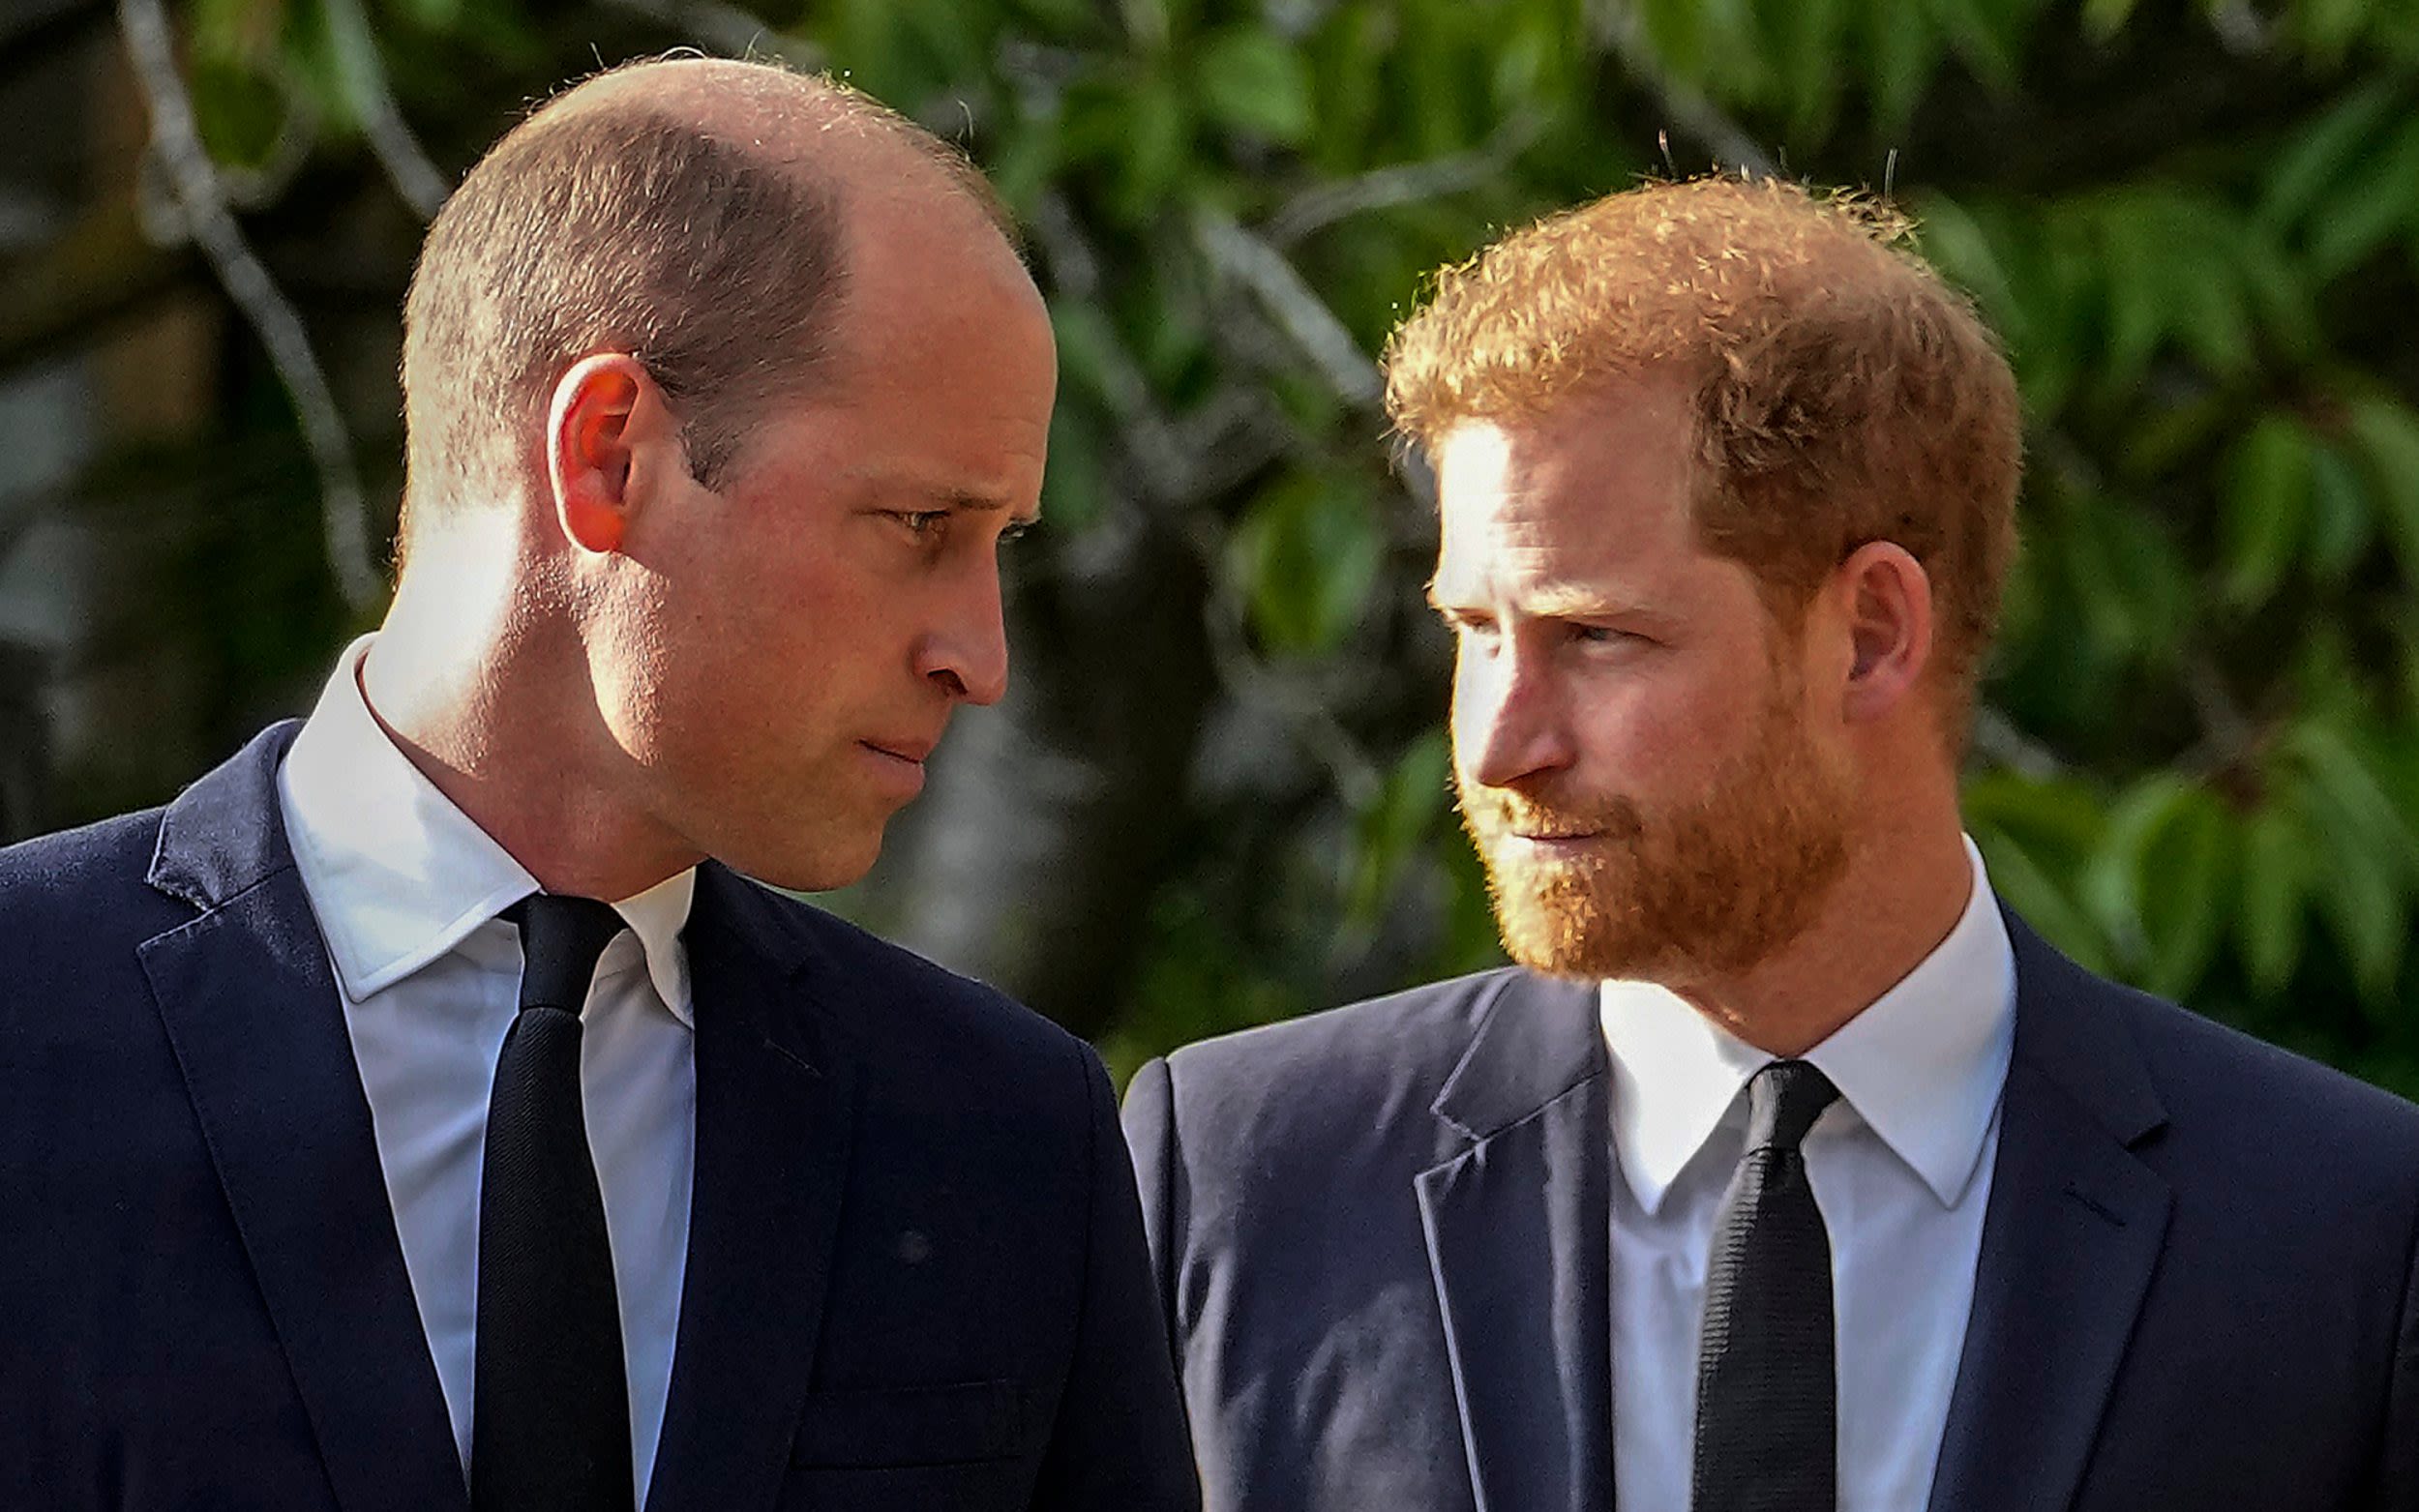 I never thought I’d say this – but it’s time to bring Prince Harry home